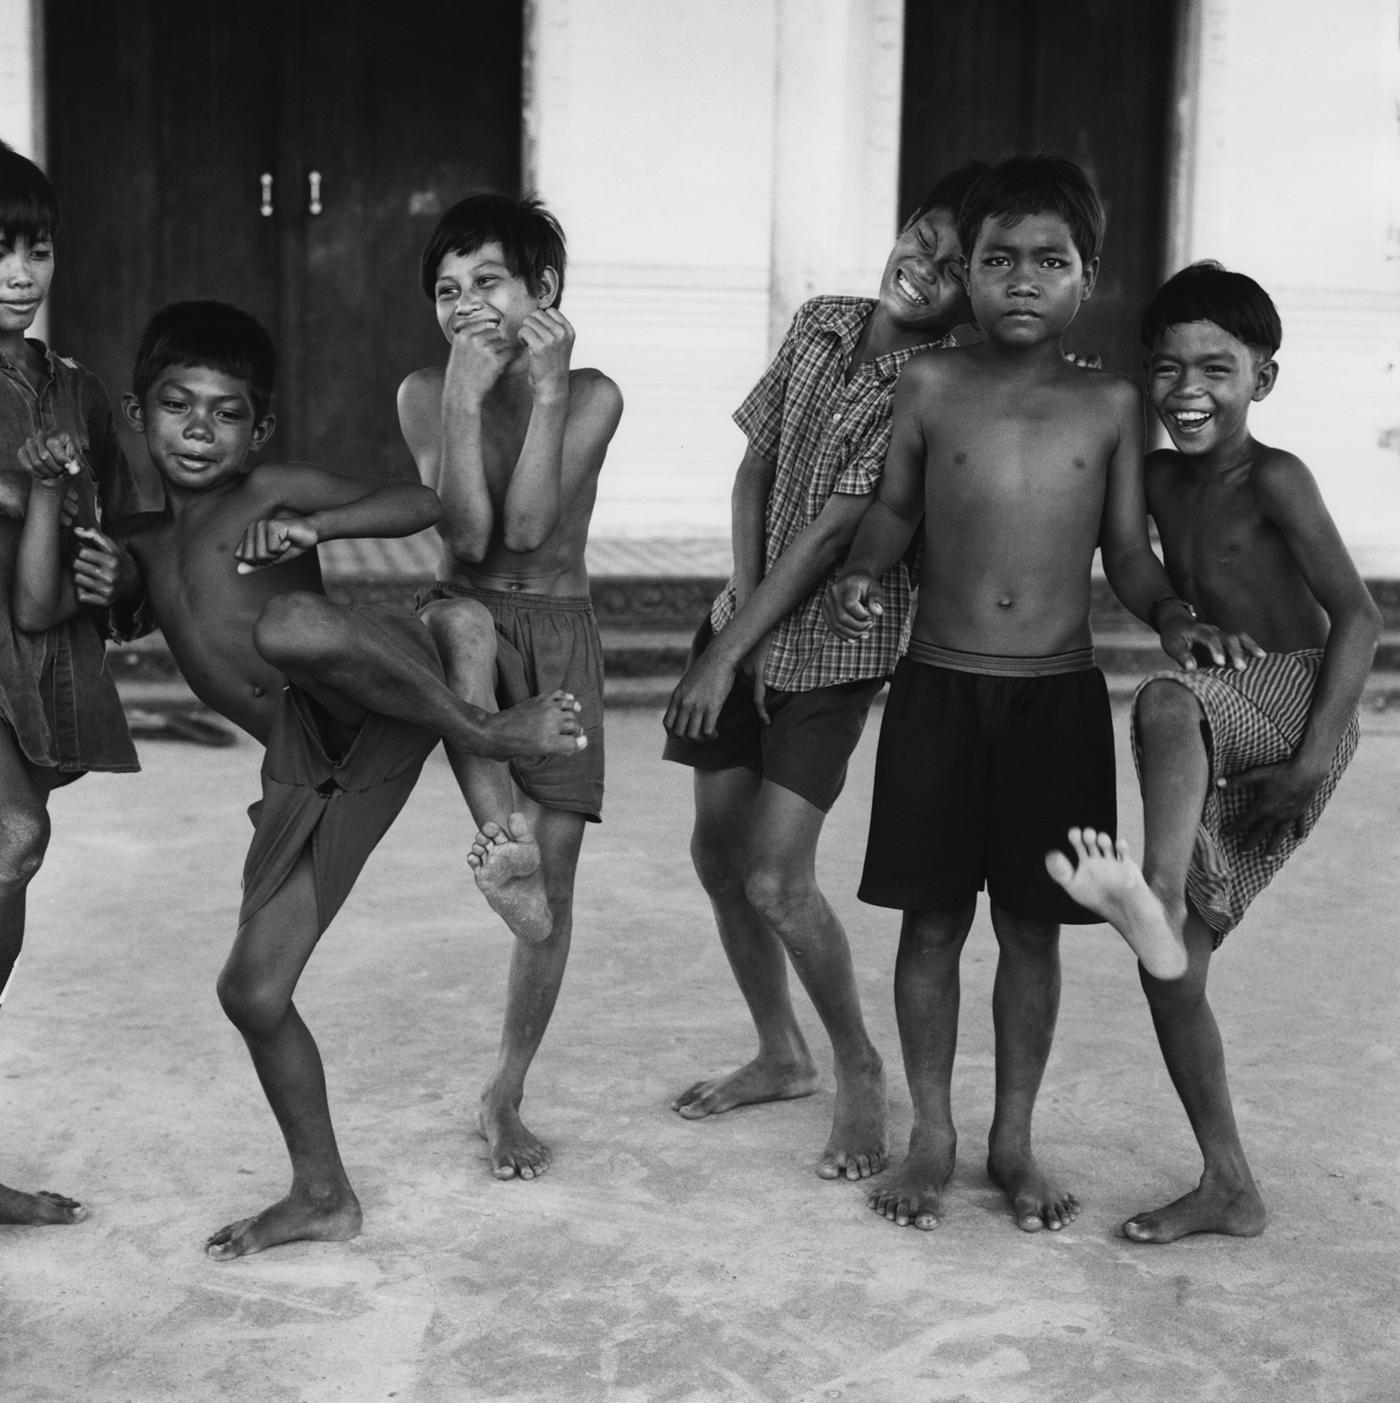 Justin Creedy Smith Figurative Photograph - Cambodia Smiles   Signed  Limited Edition   Oversize print